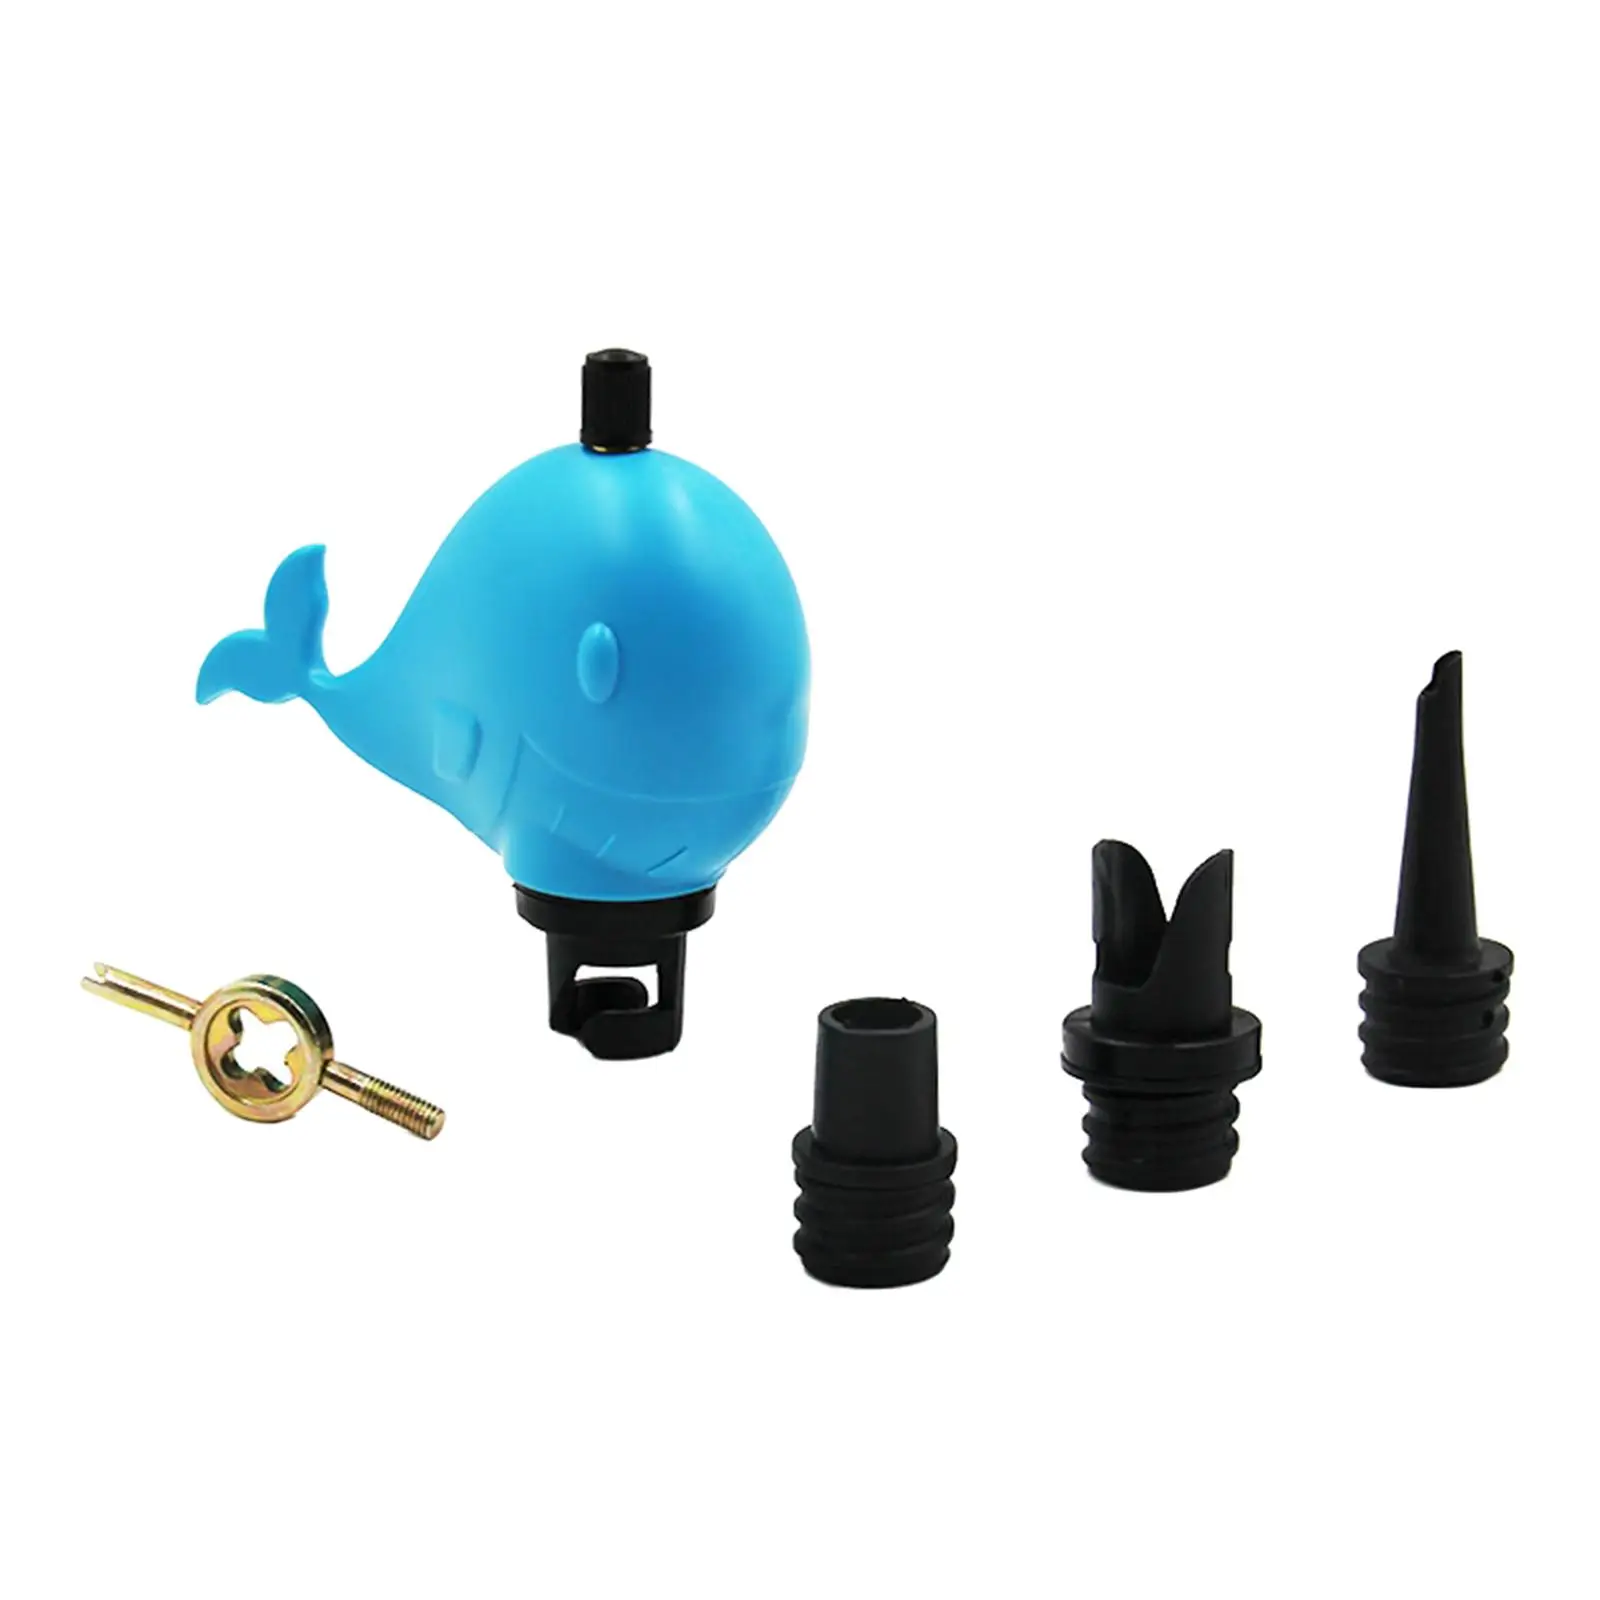 Pump Adaptor Lightweight Replacement Inflatable Boat Pump Adaptor for Dinghy Rubber Boats Canoe Paddle Board Accessories